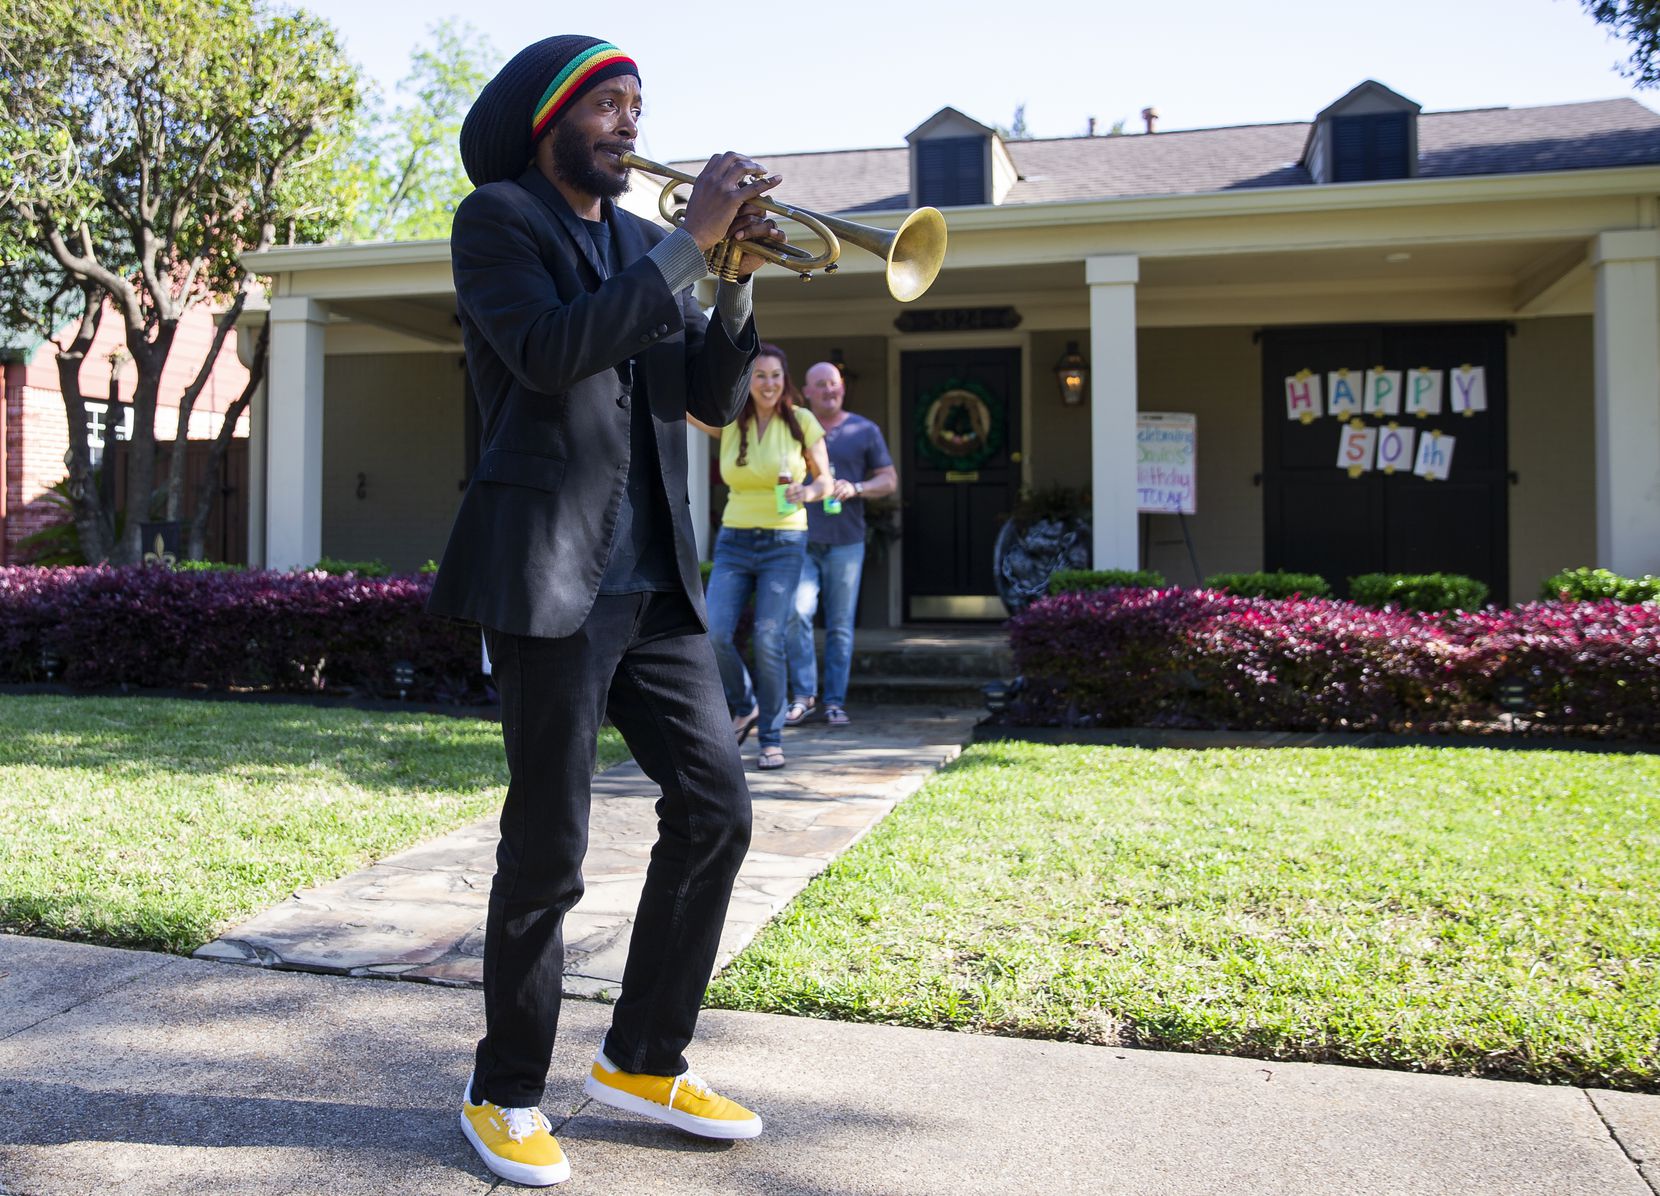 Trumpeter Alcedrick Todd (left) performs for David Hannah's 50th birthday outside of his house after his wife Dina Hannah posted on the Nextdoor app on April 10, 2020 in Dallas. The couple originally planned to celebrate the birthday in New Orleans. (Juan Figueroa/ The Dallas Morning News)